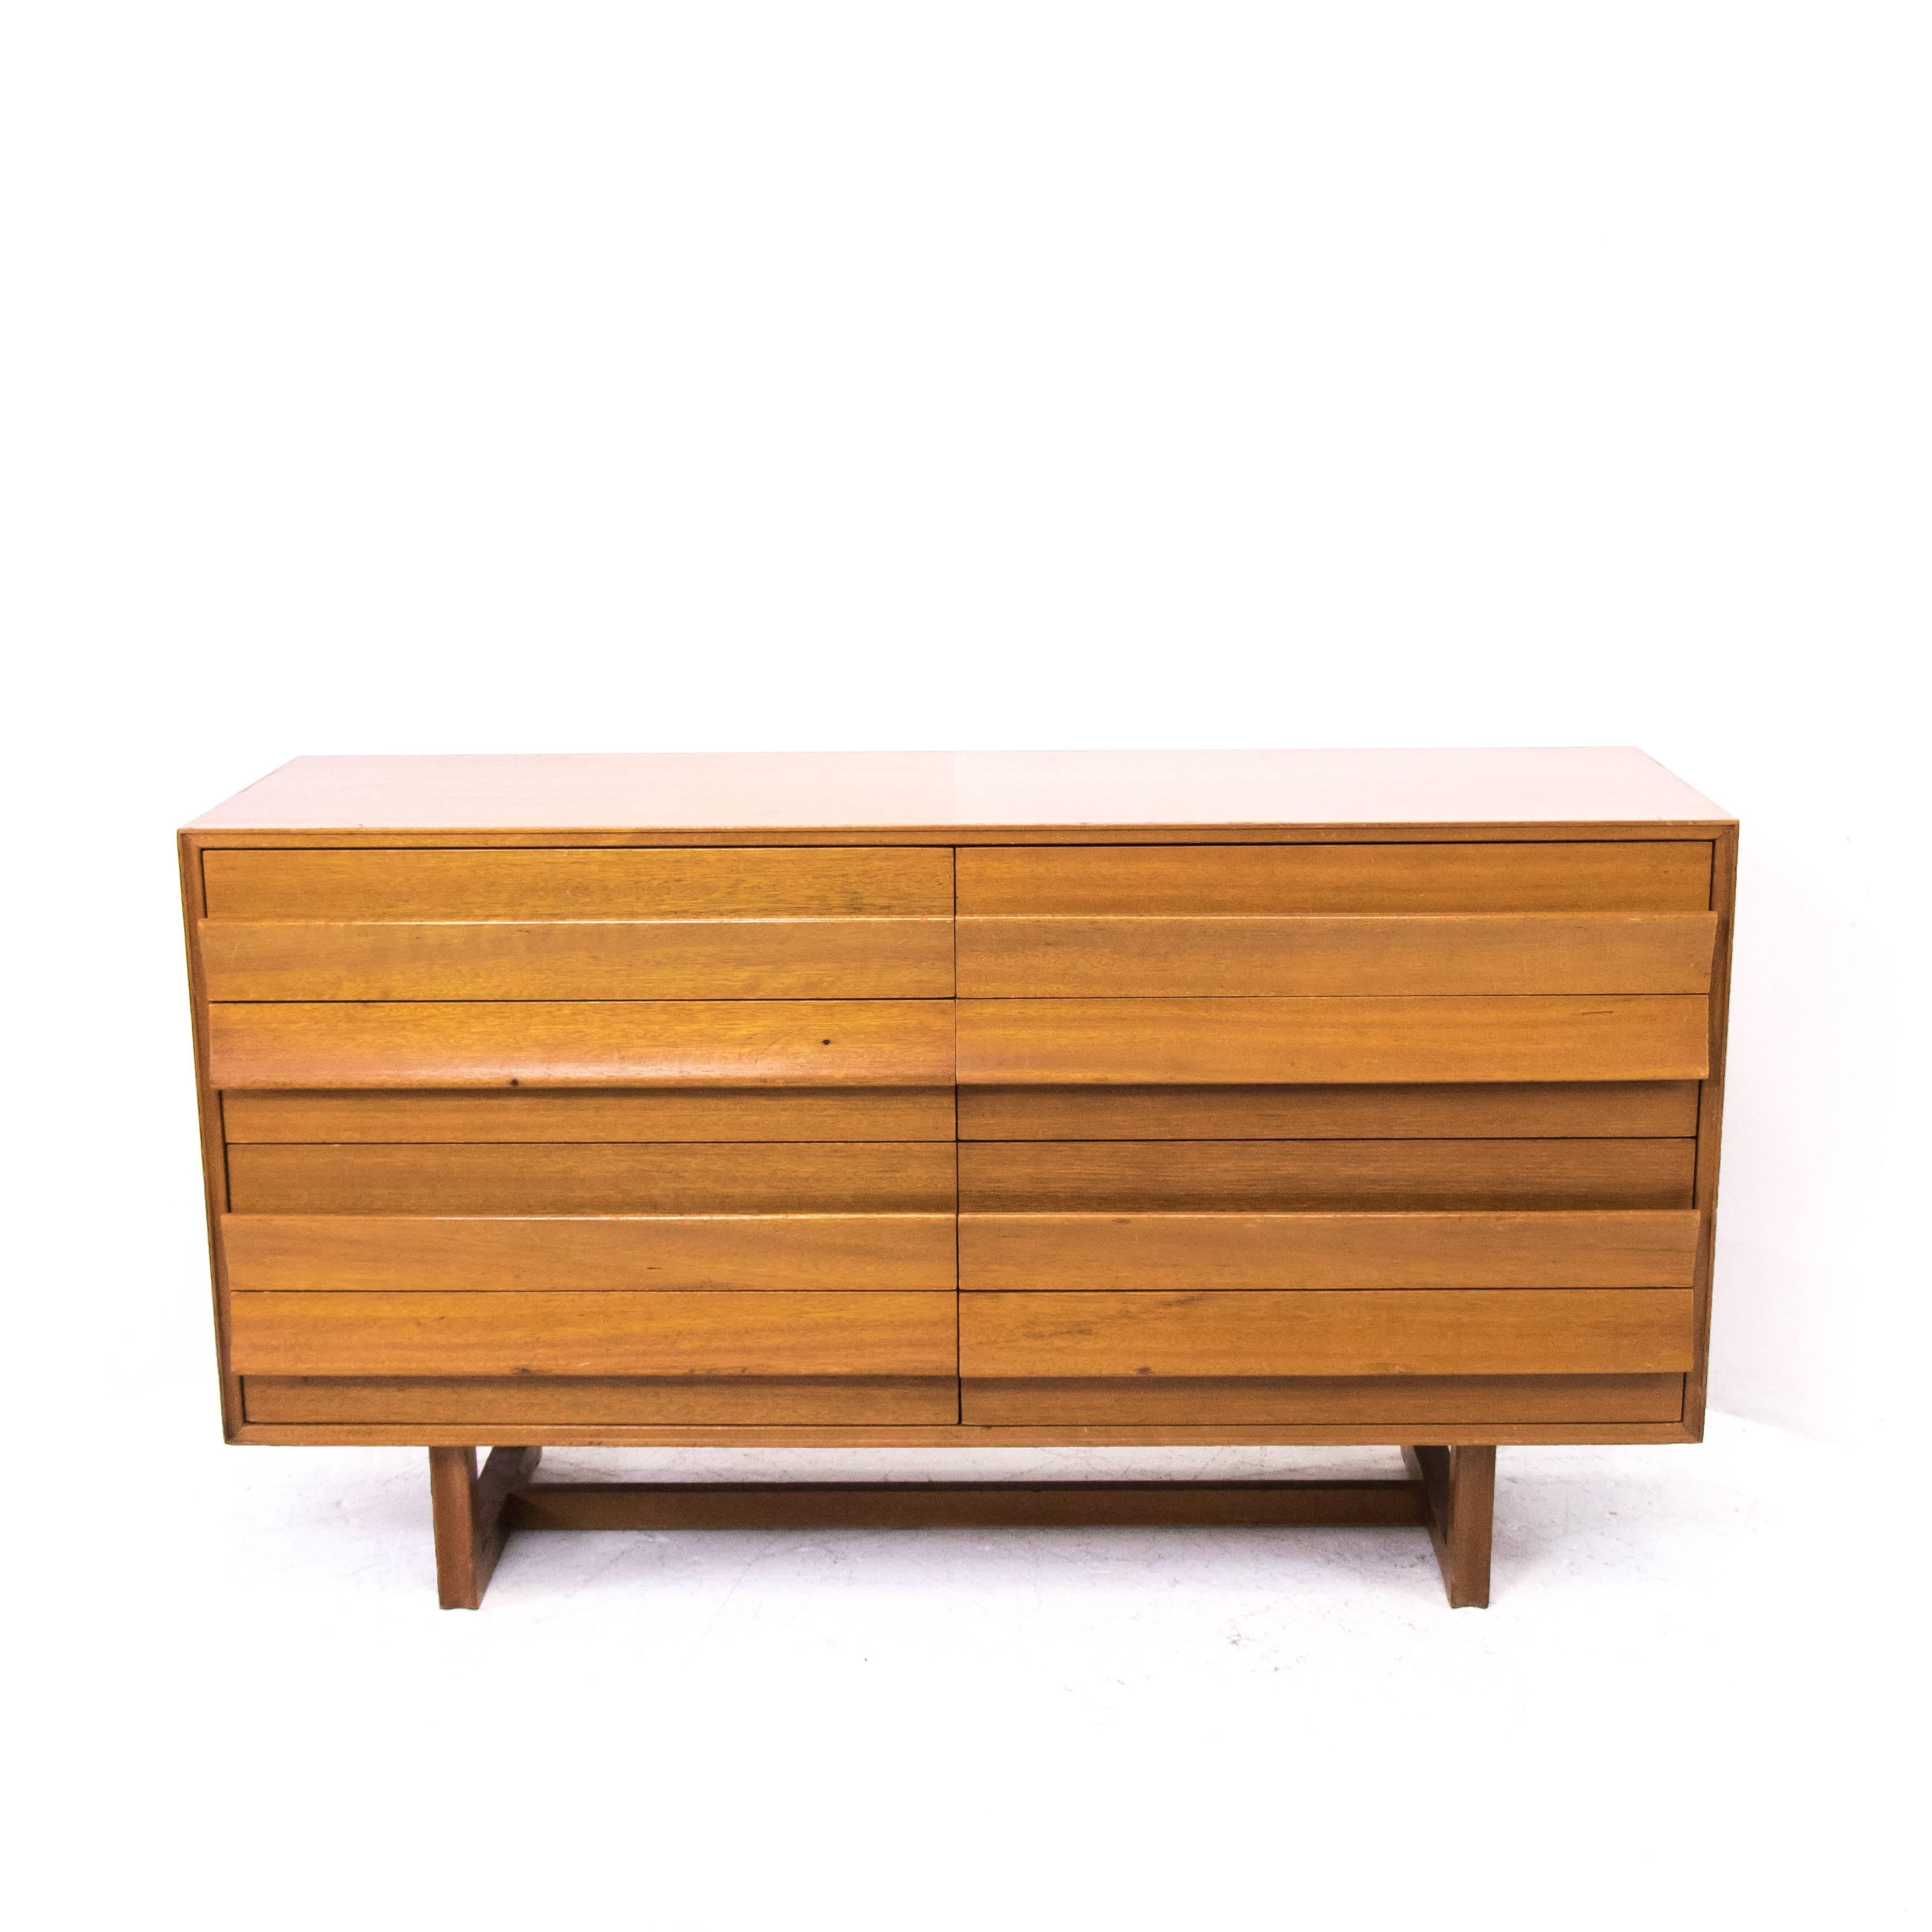 Mid-Century Dresser by Paul Laszlo for Brown Saltman. The dresser does need refinishing, circa 1960s

Dimensions: 60" W x 18" D x 33.5" T.